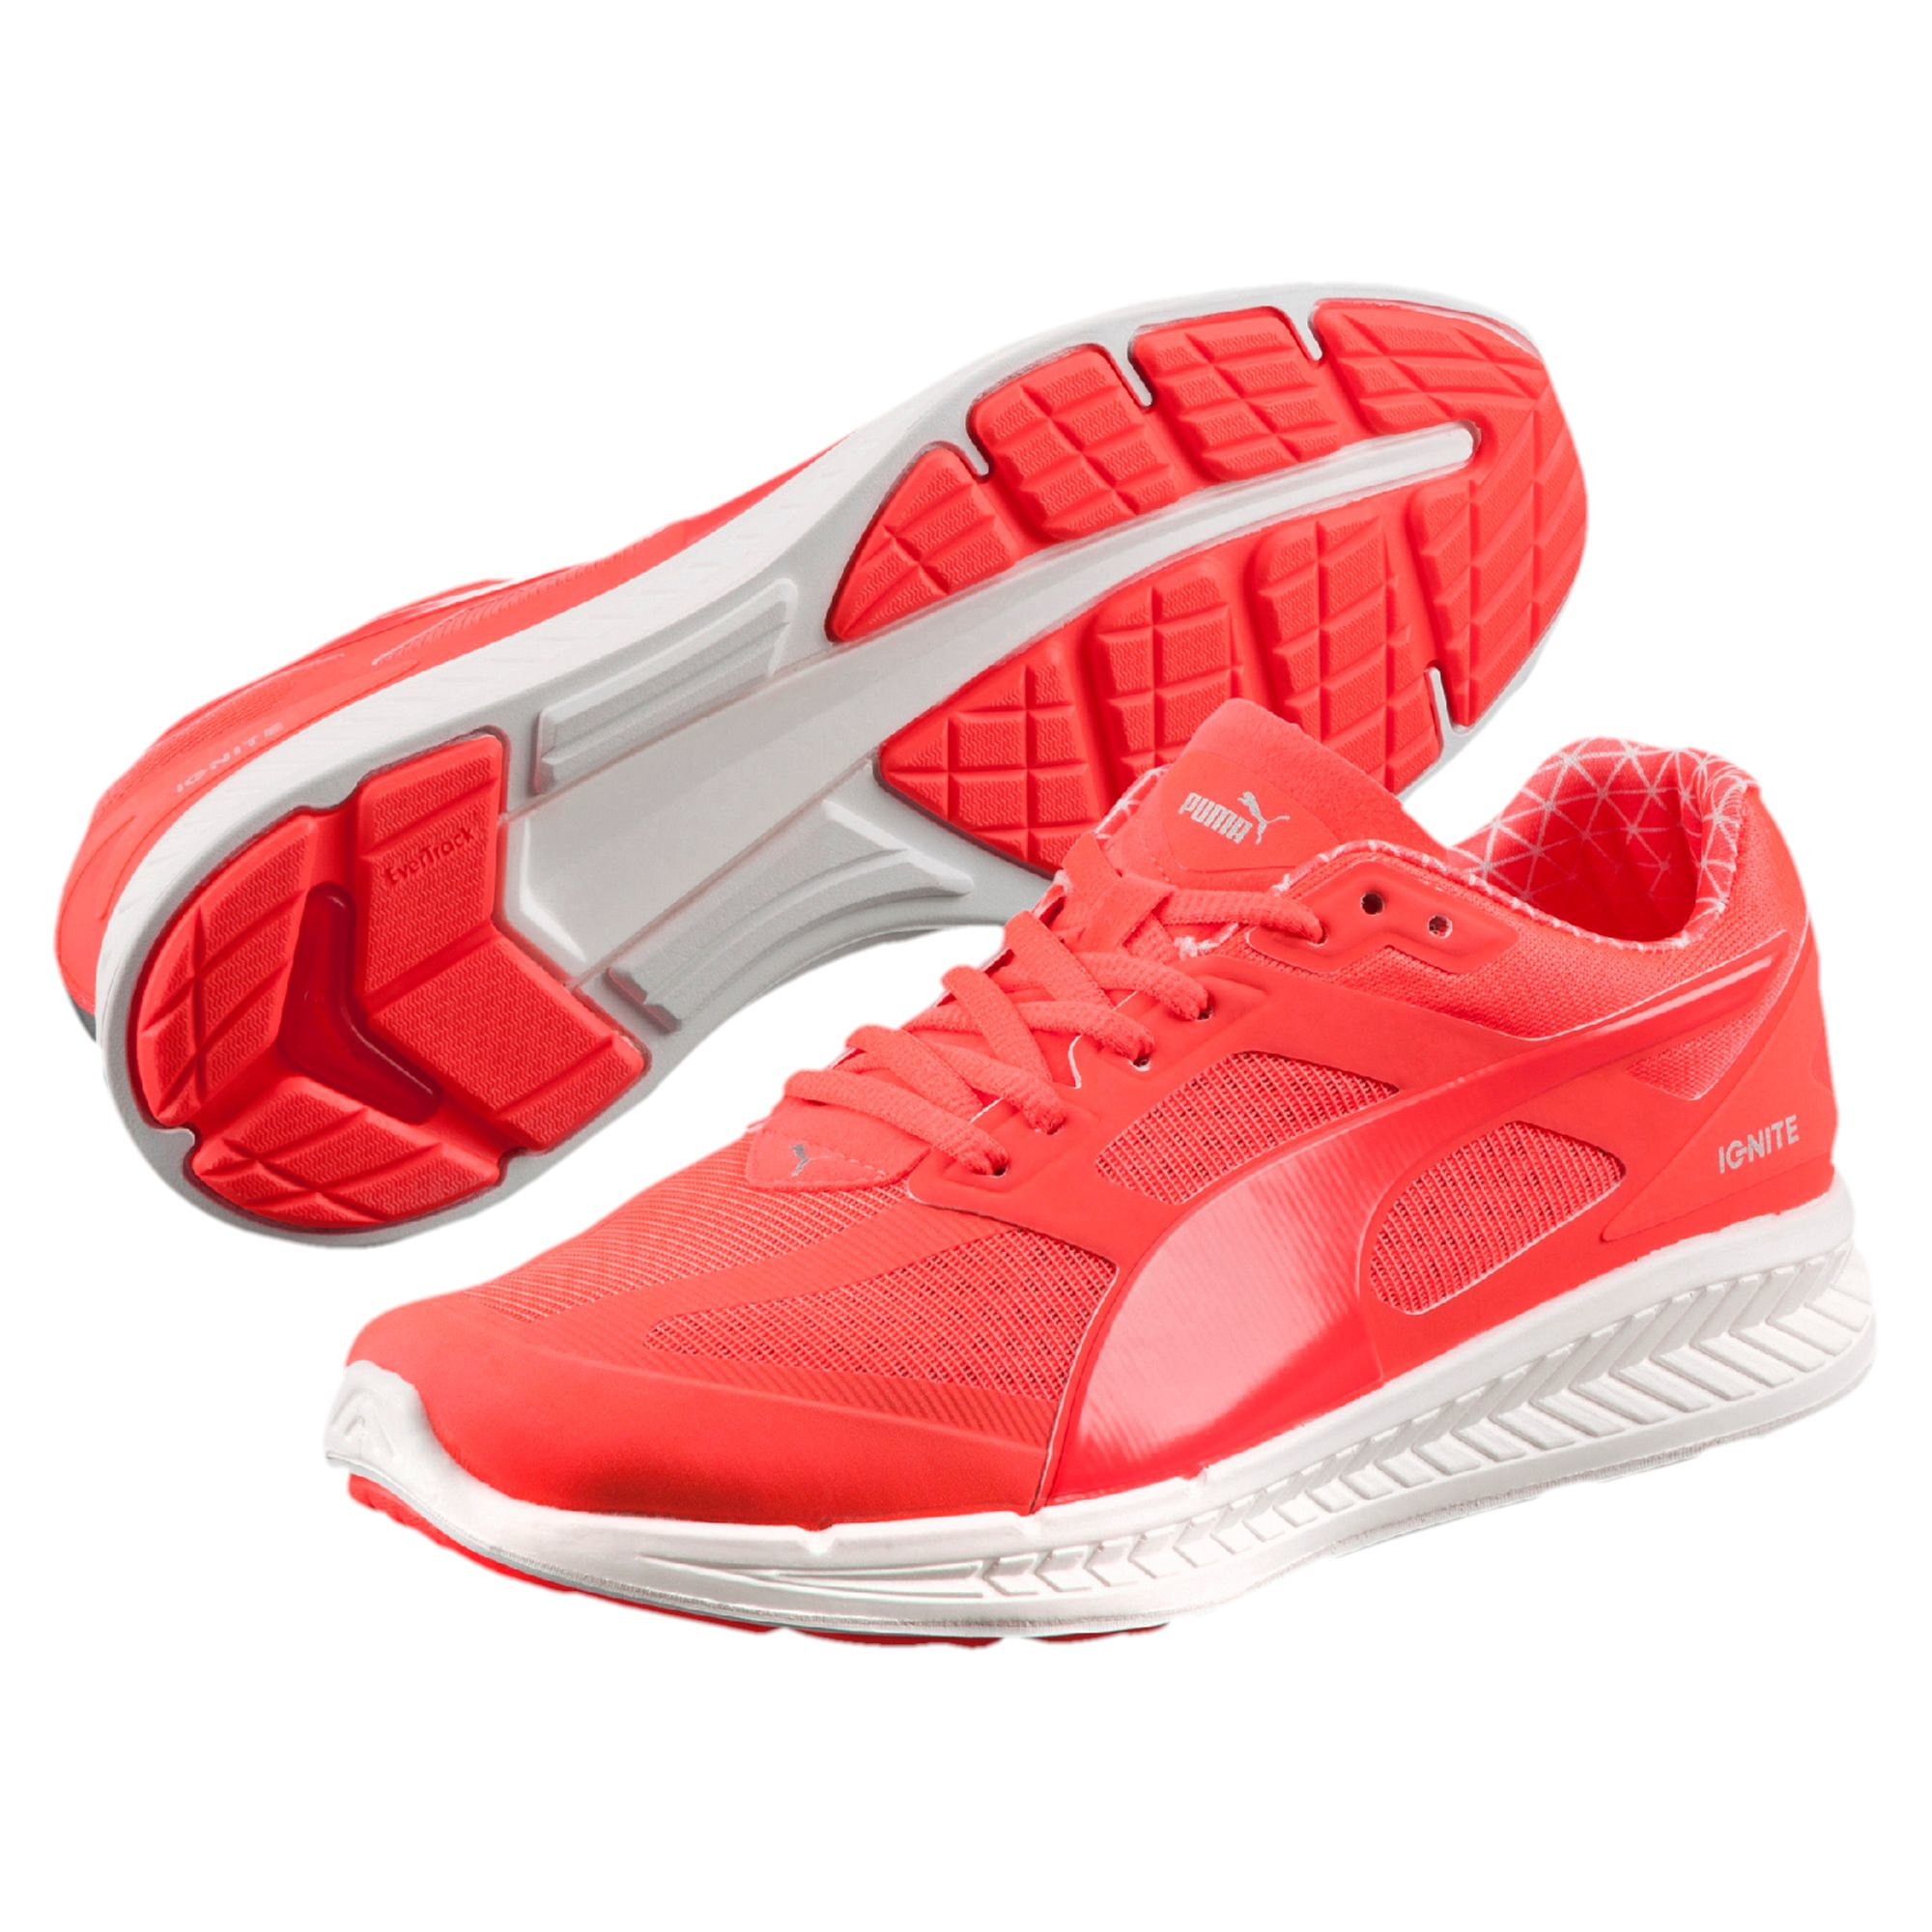 Lyst - Puma Ignite Pwrwarm Women's Running Shoes in Red